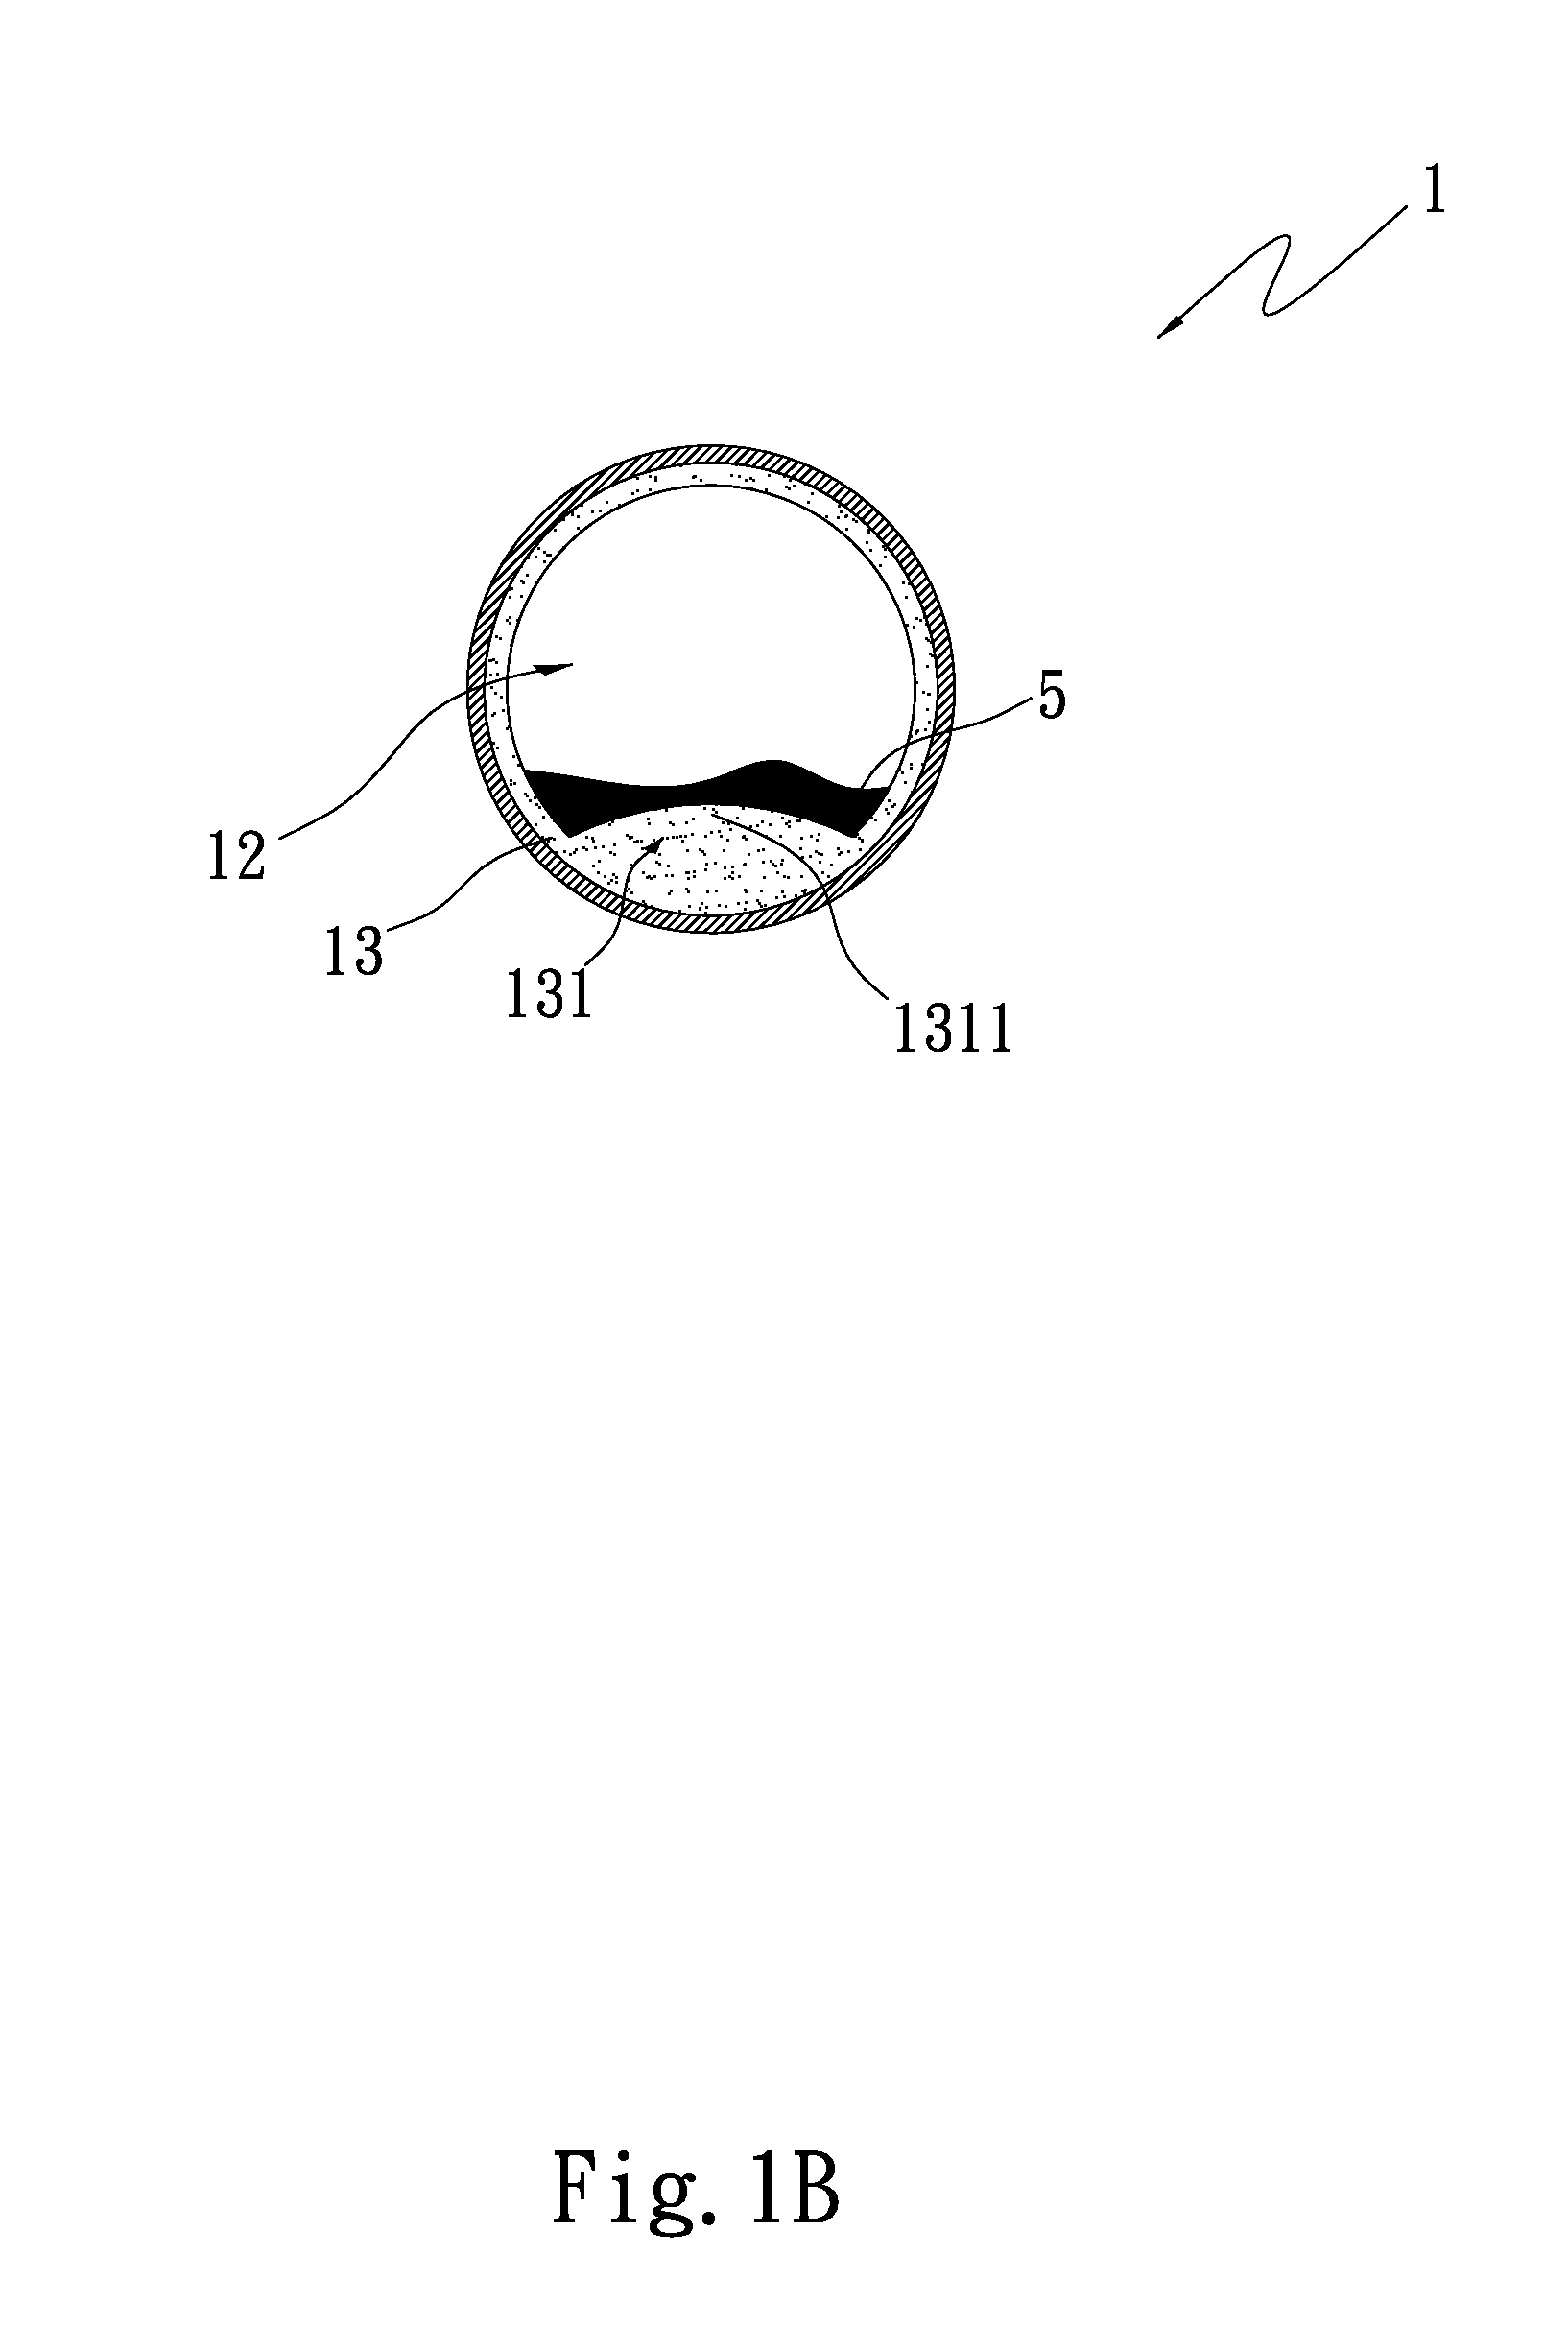 Heat pipe heat dissipation structure